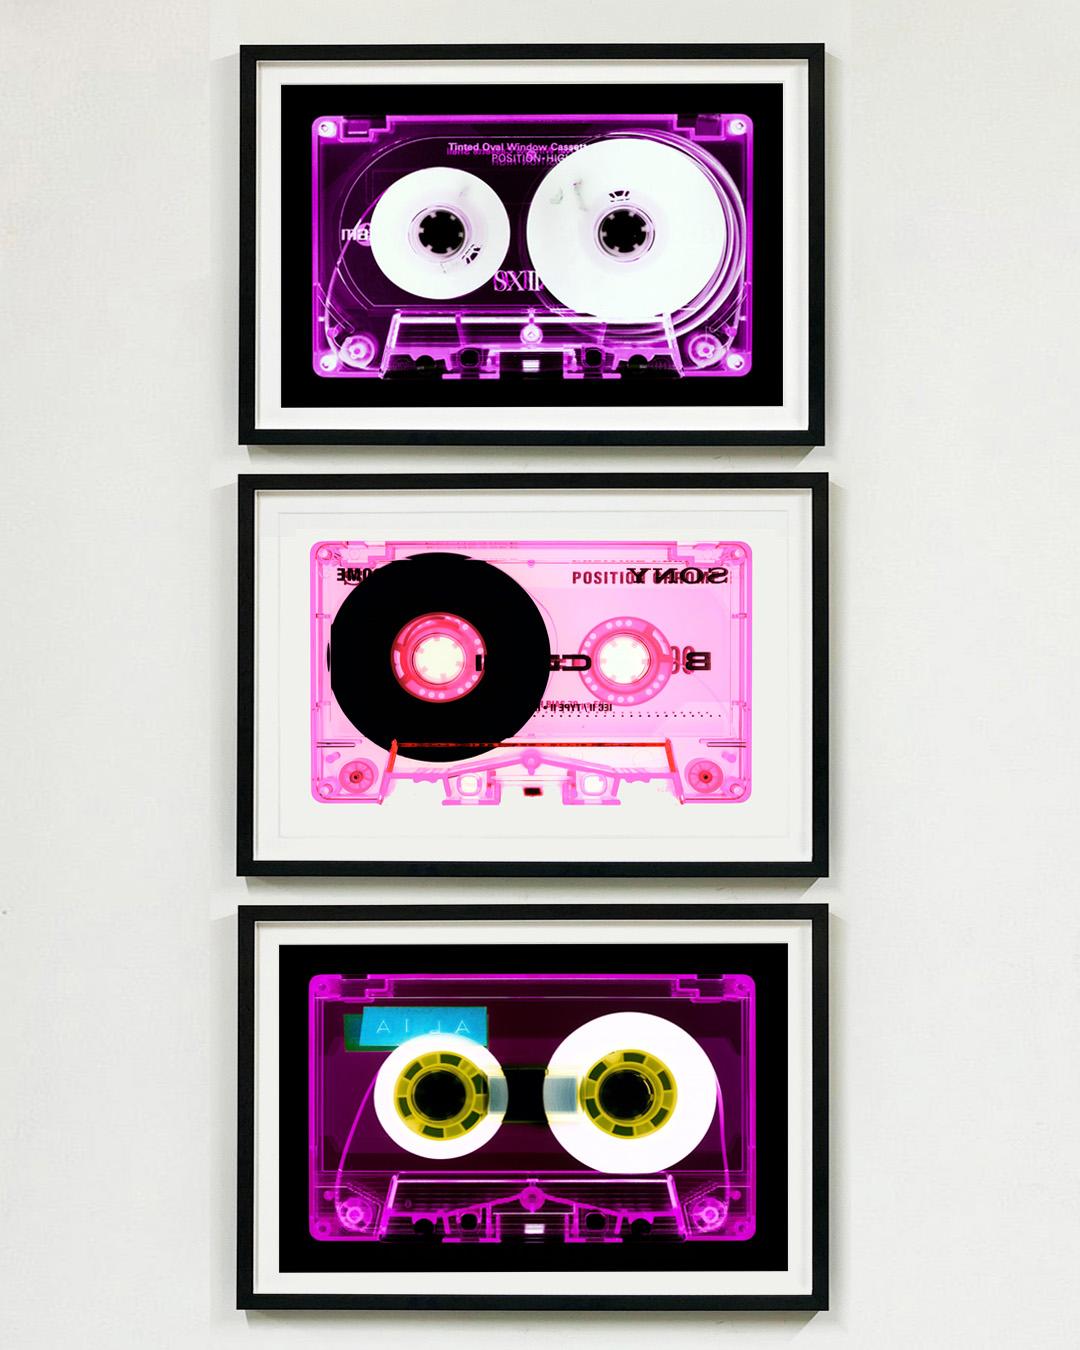 Heidler & Heeps Still-Life Photograph - Tape Collection Pop of Pink Set of Three Artworks - Pop art color photography 